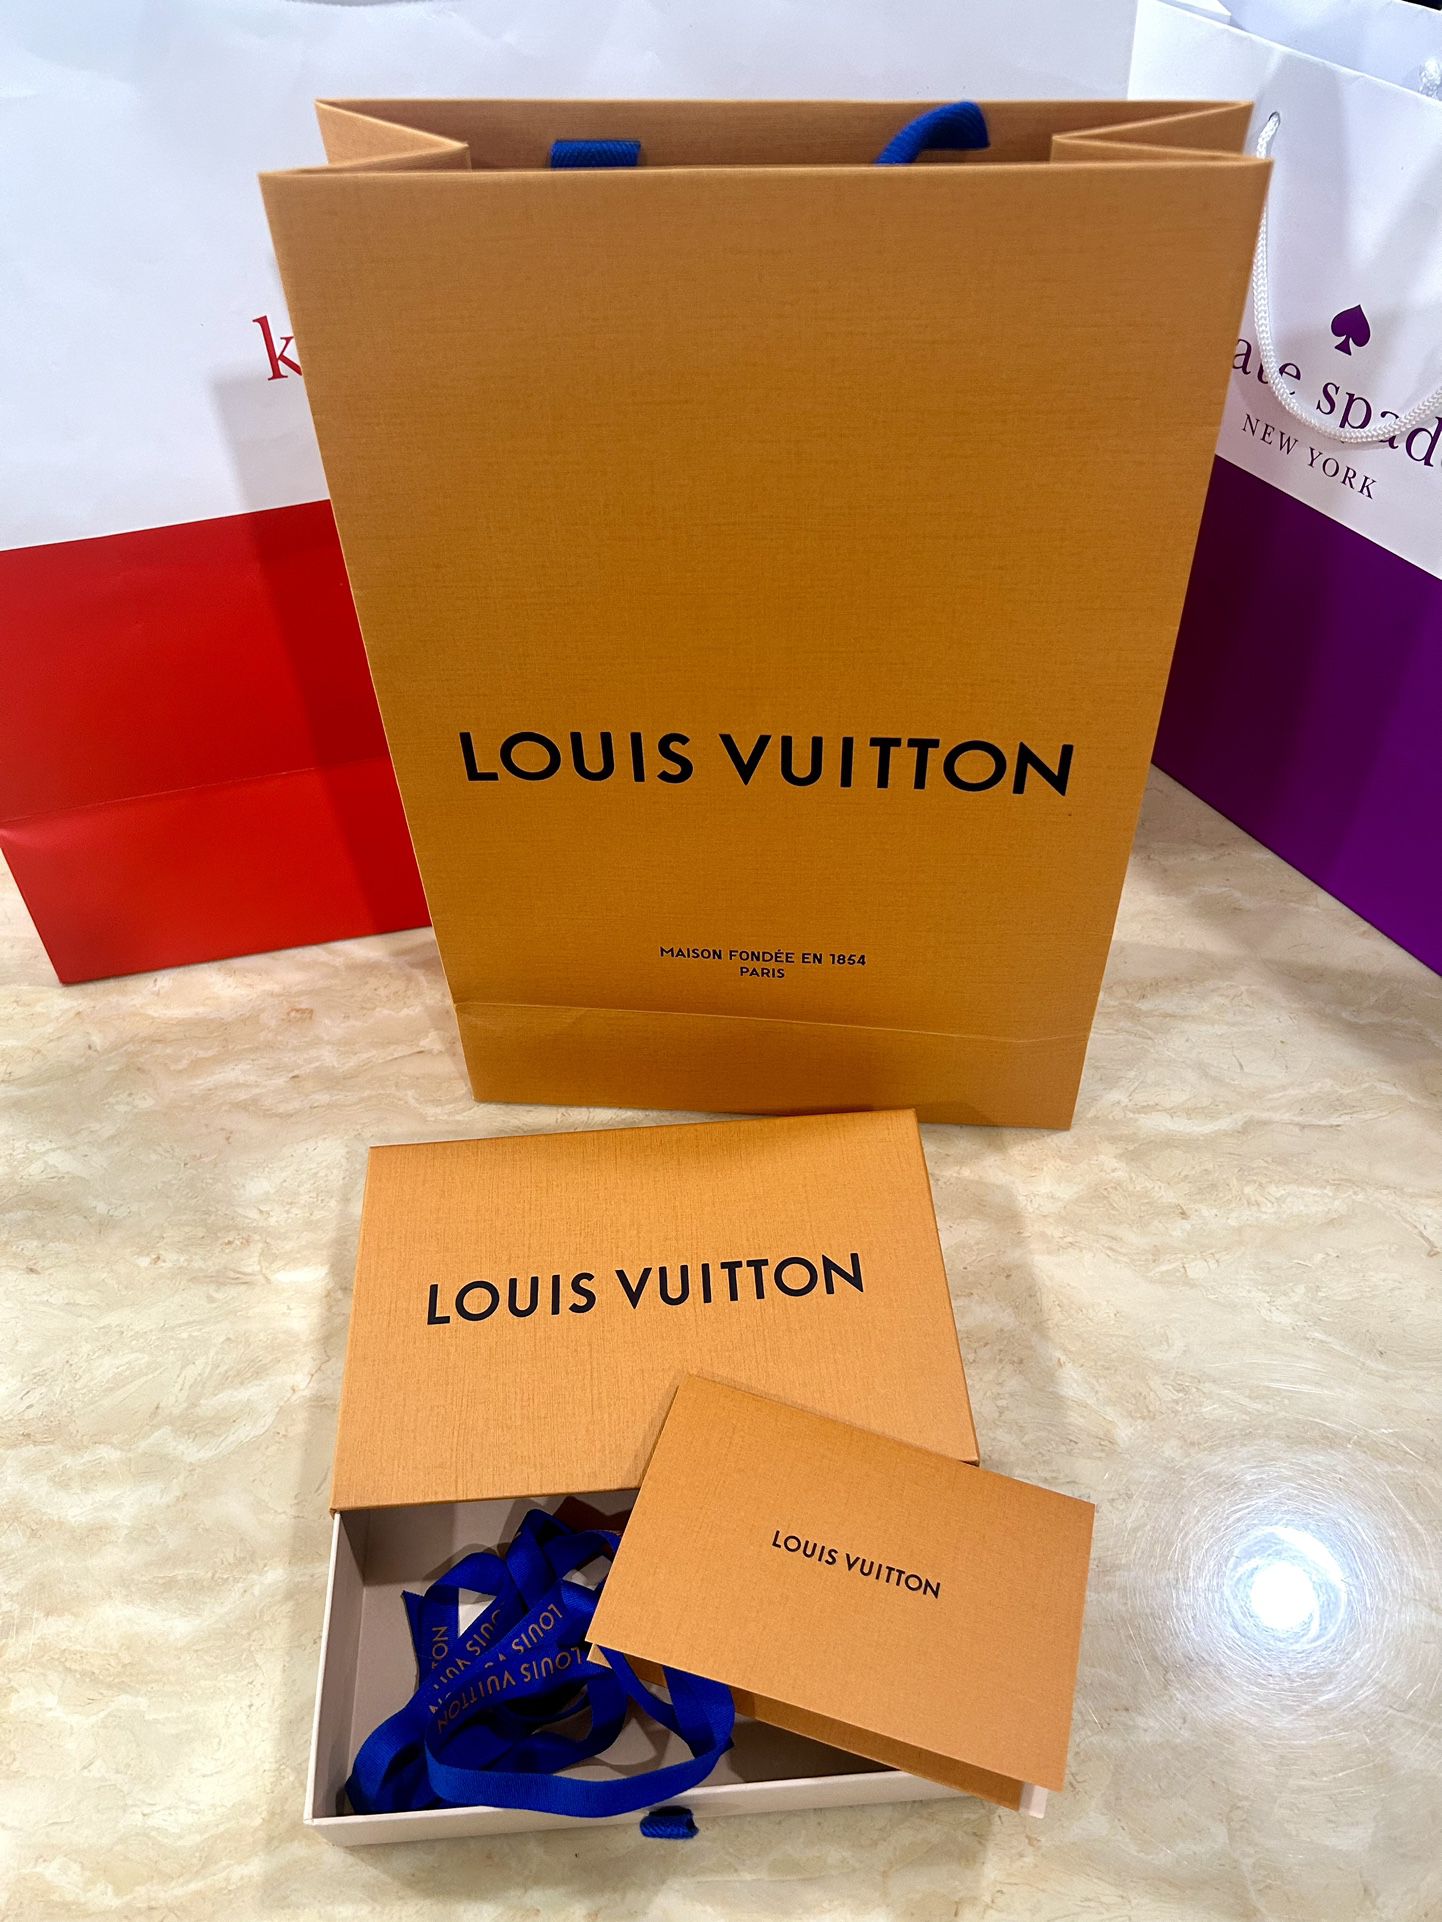 New Louis Vuitton Gift Bag Package 